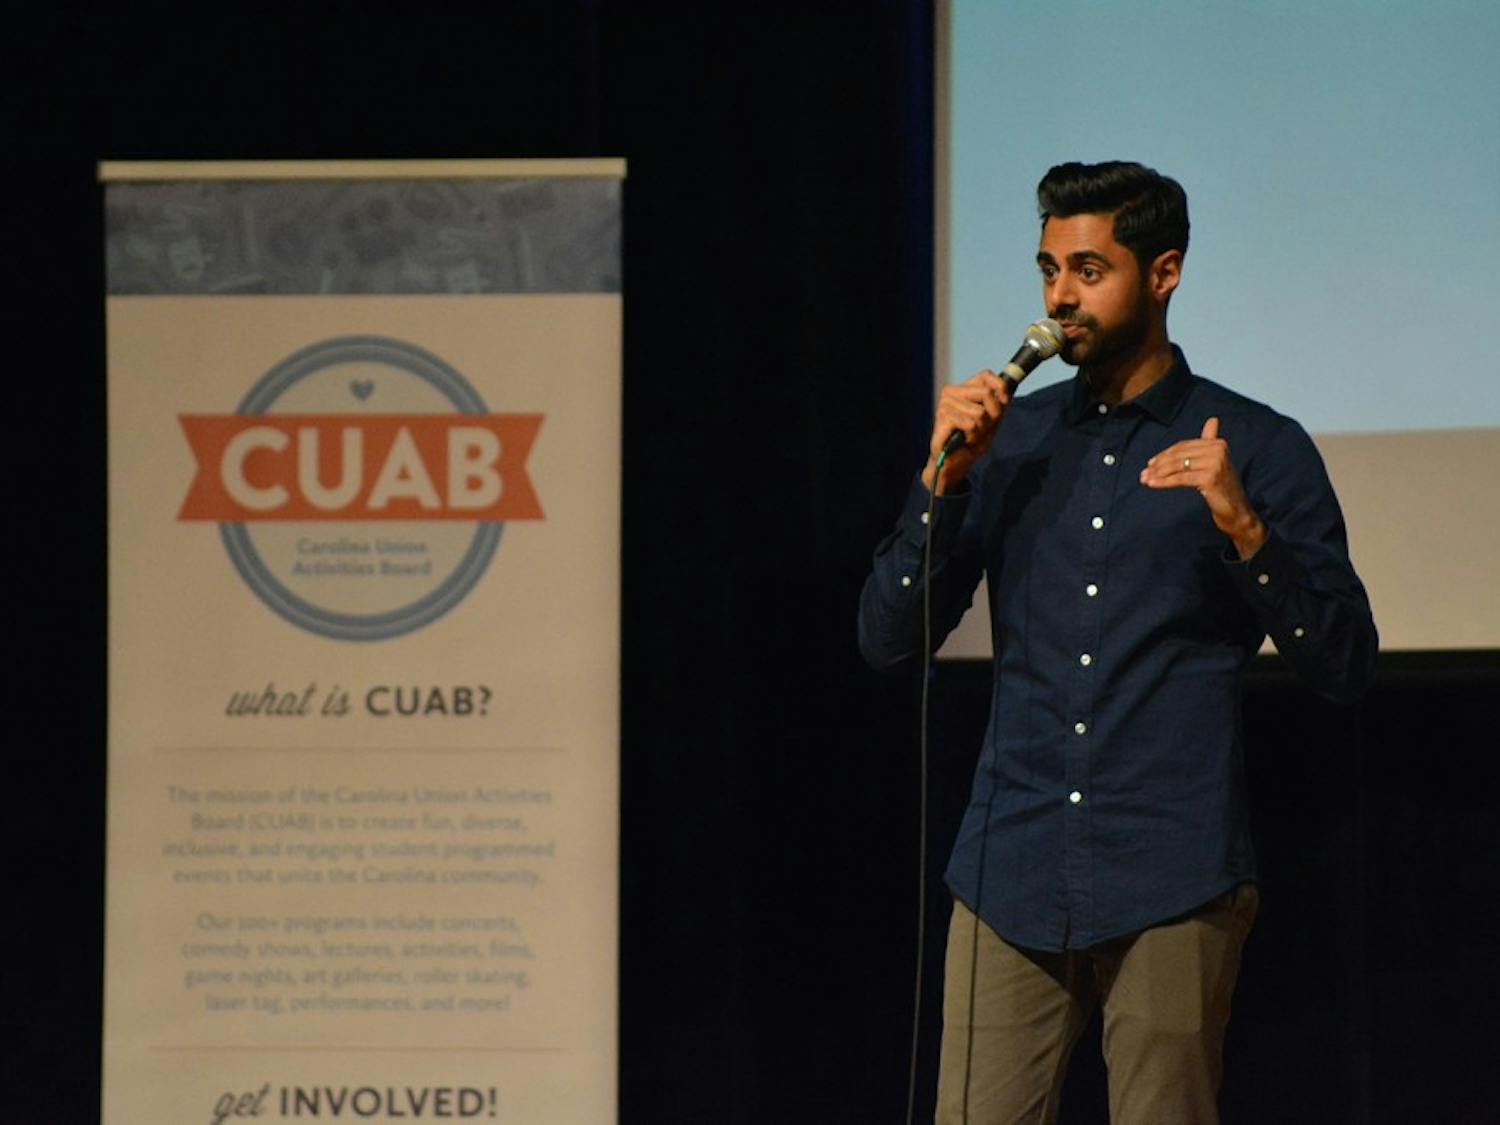 Hasan Minhaj of The Daily Show talks about the election results from the Muslim perspective on Saturday night in the Great Hall.The UNC Muslim Students Association worked with the Carolina Union Activities Board to hold the event. 